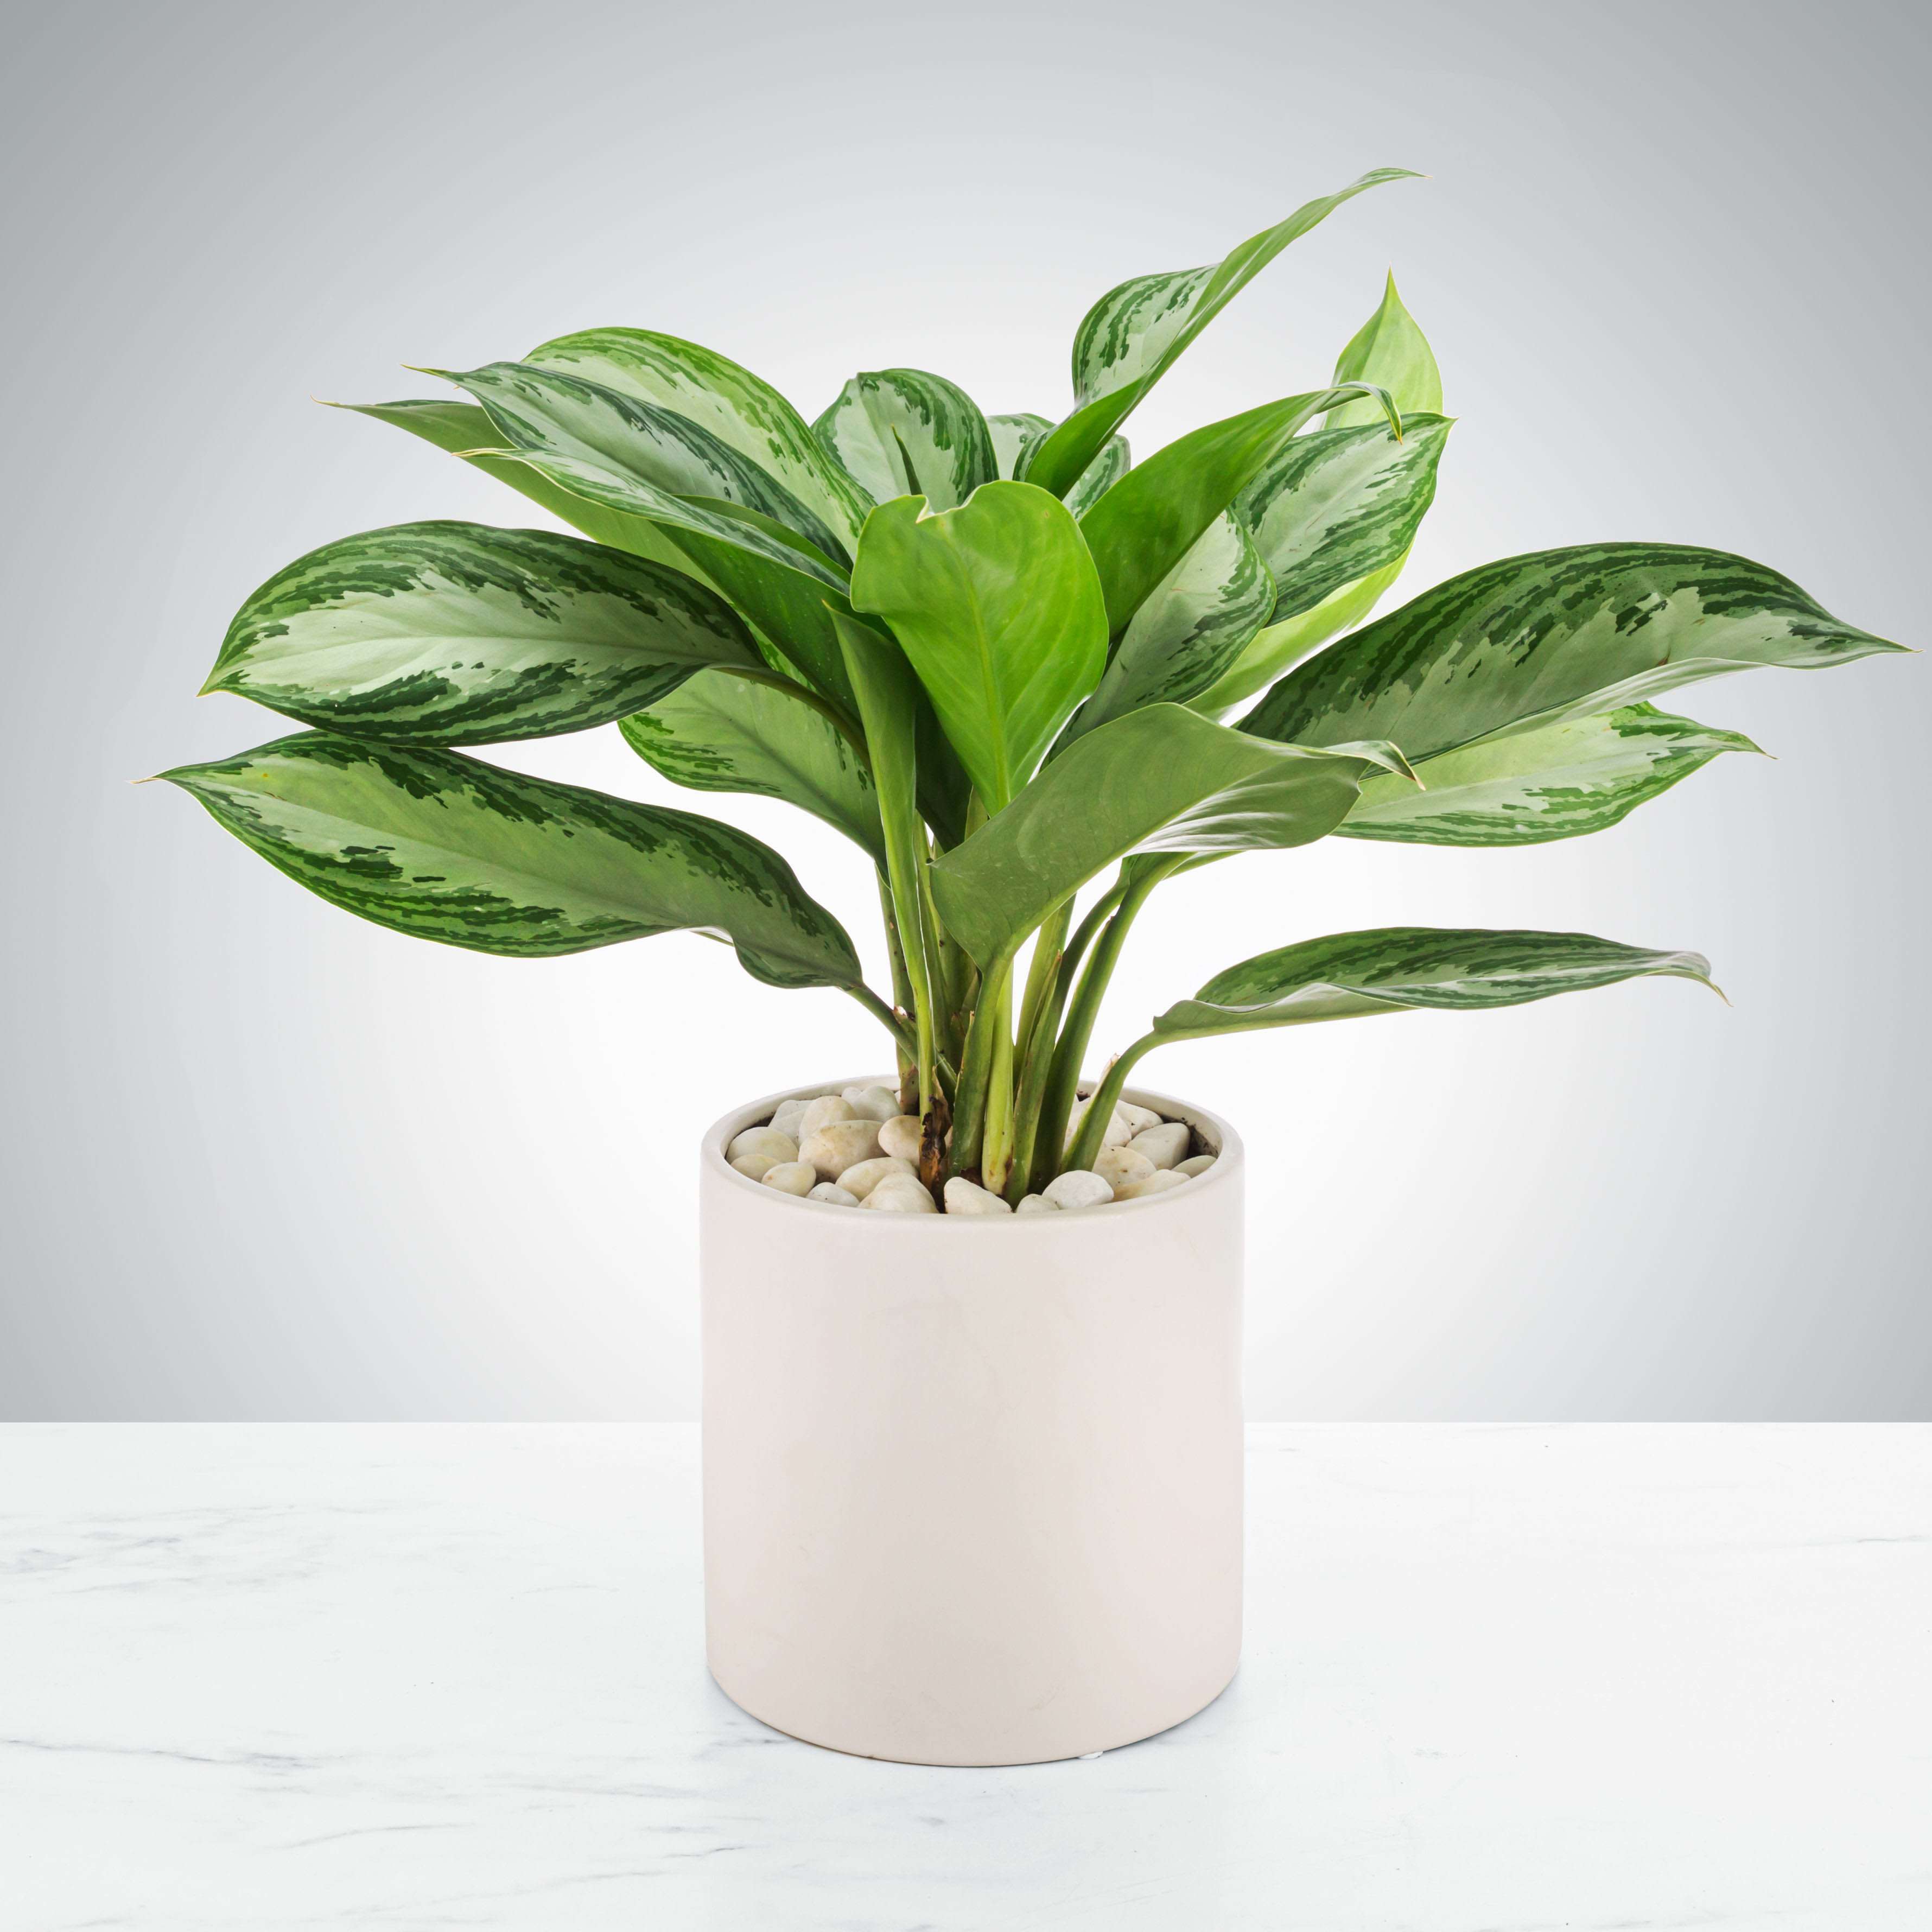 Chinese Evergreen Plant by BloomNation™ - A great plant for beginners and for your friend that &quot;kills everything&quot;. Chinese Evergreens, or aglaonema commutatum, are tough and can survive in most homes but prefer medium to low light conditions or indirect sunlight. They also can be overwatered and underwatered without immediately dying AND have good air filtering qualities. Overall a winning houseplant for anybody.